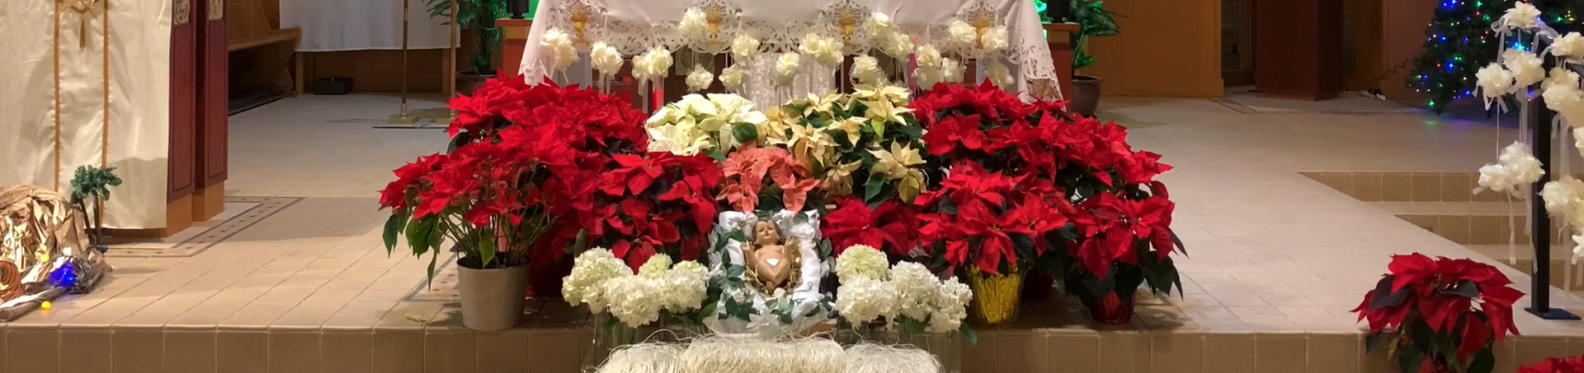 Baby Jesus front of Altar